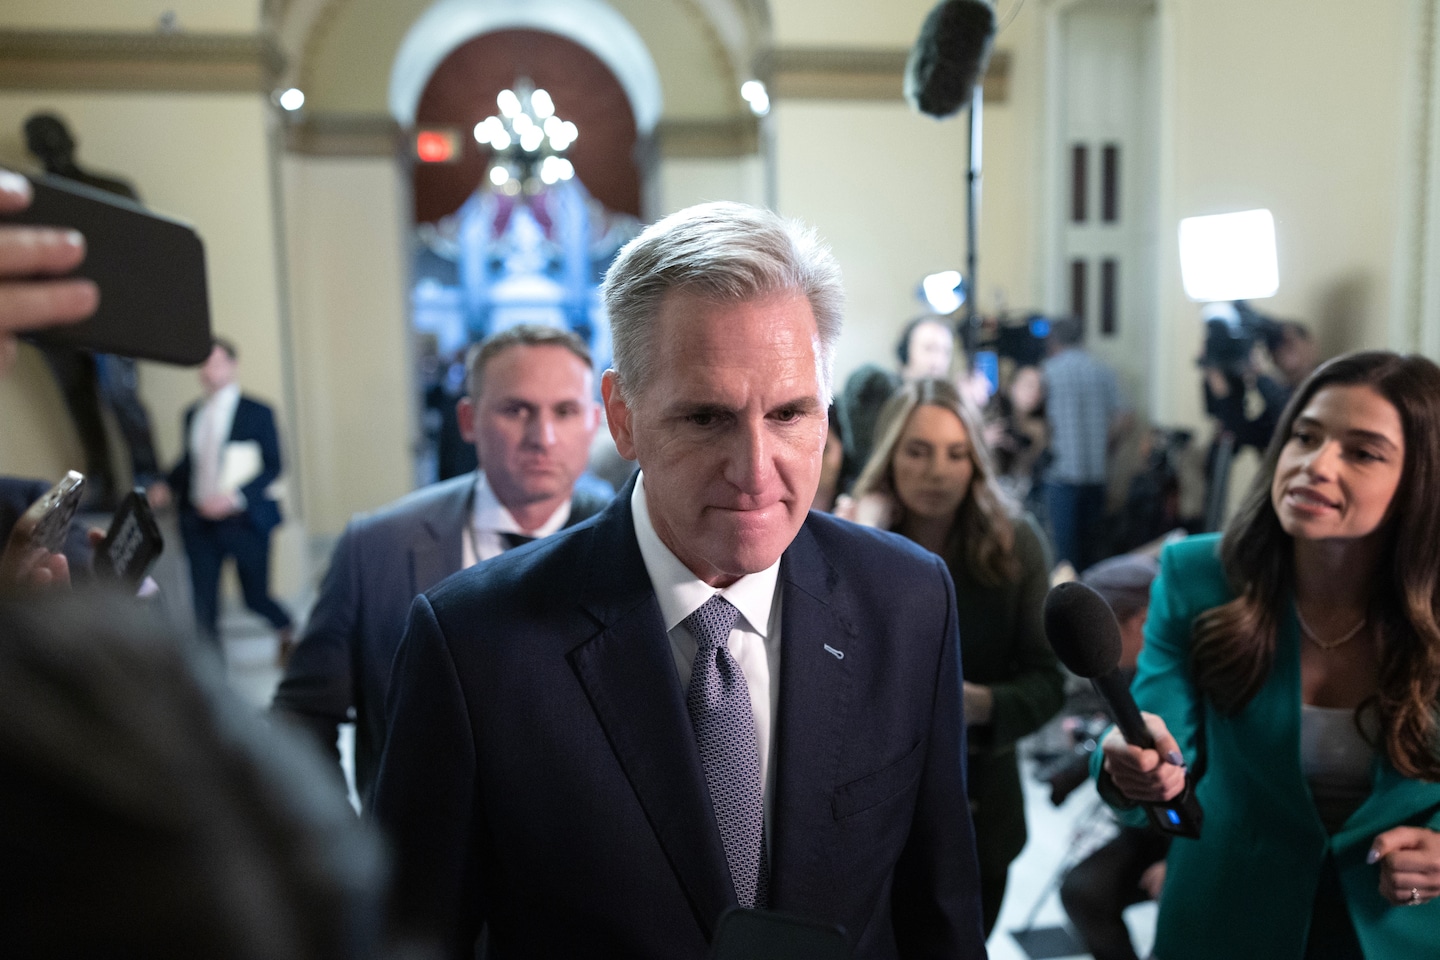 Live updates: Kevin McCarthy’s House speaker job under threat, with vote possible today